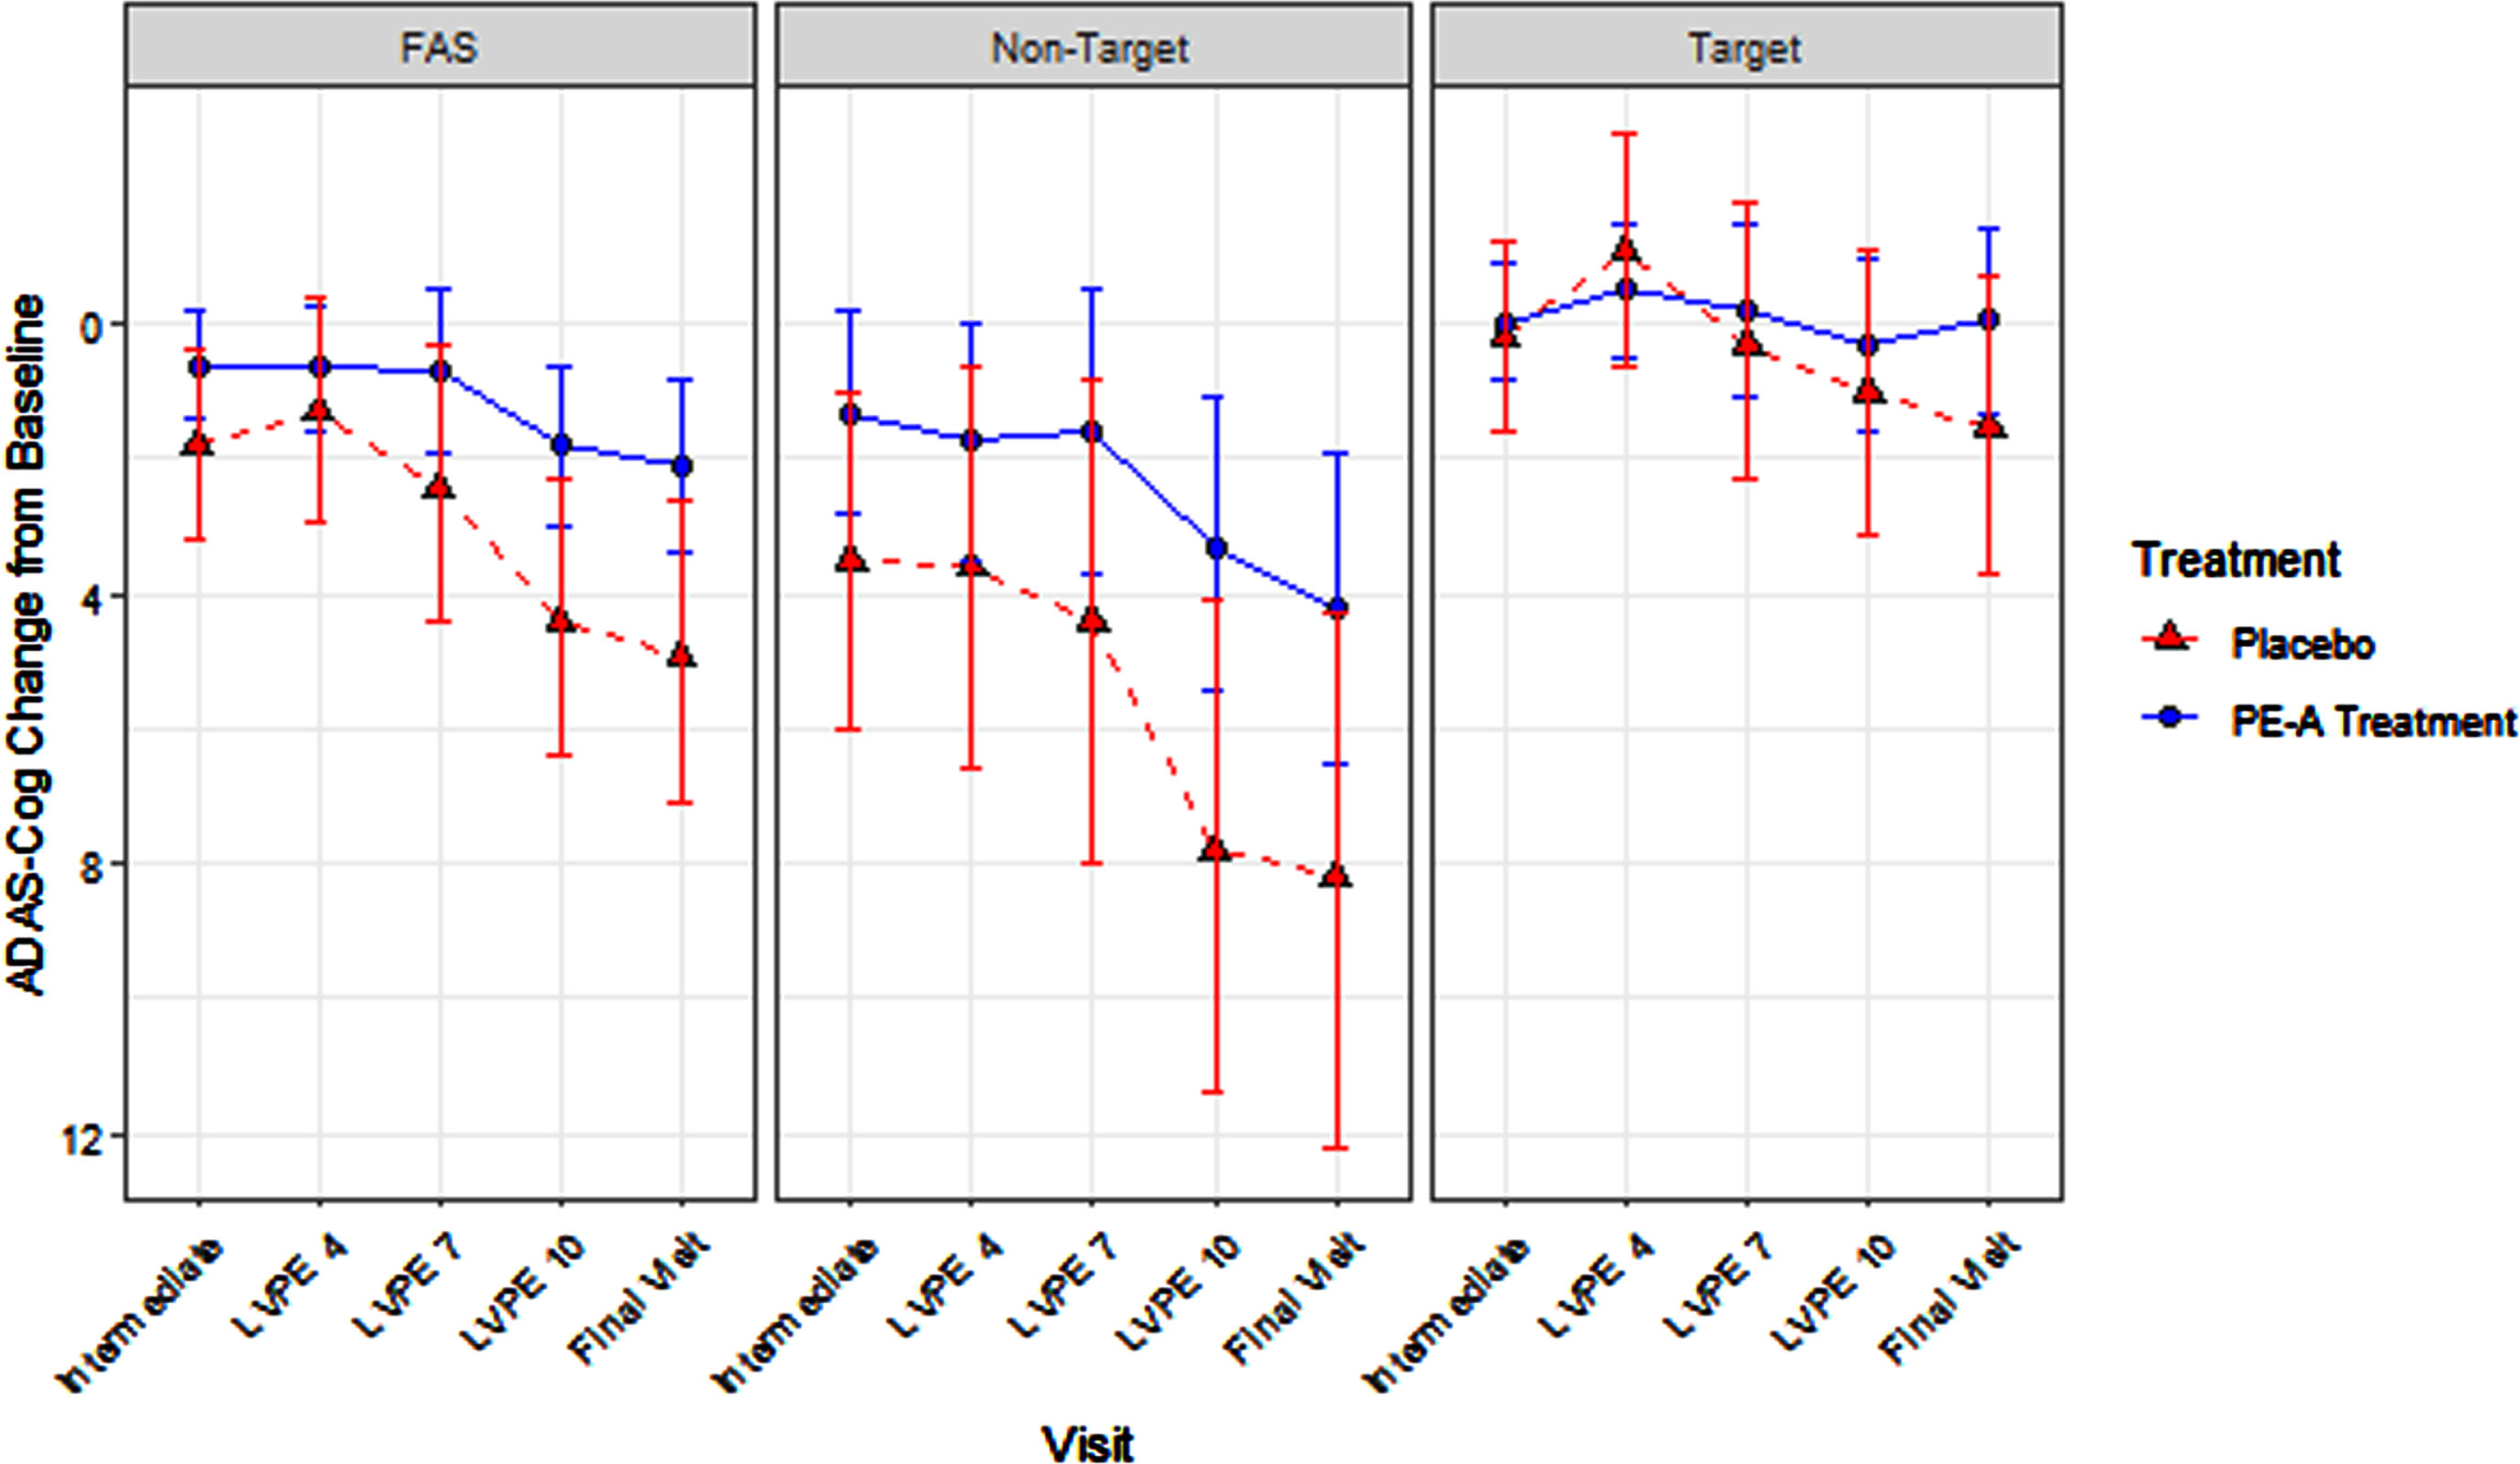 ADAS-Cog 12 Total Score: Treatment Effect in FAS, Target, and Non-Target Stages.